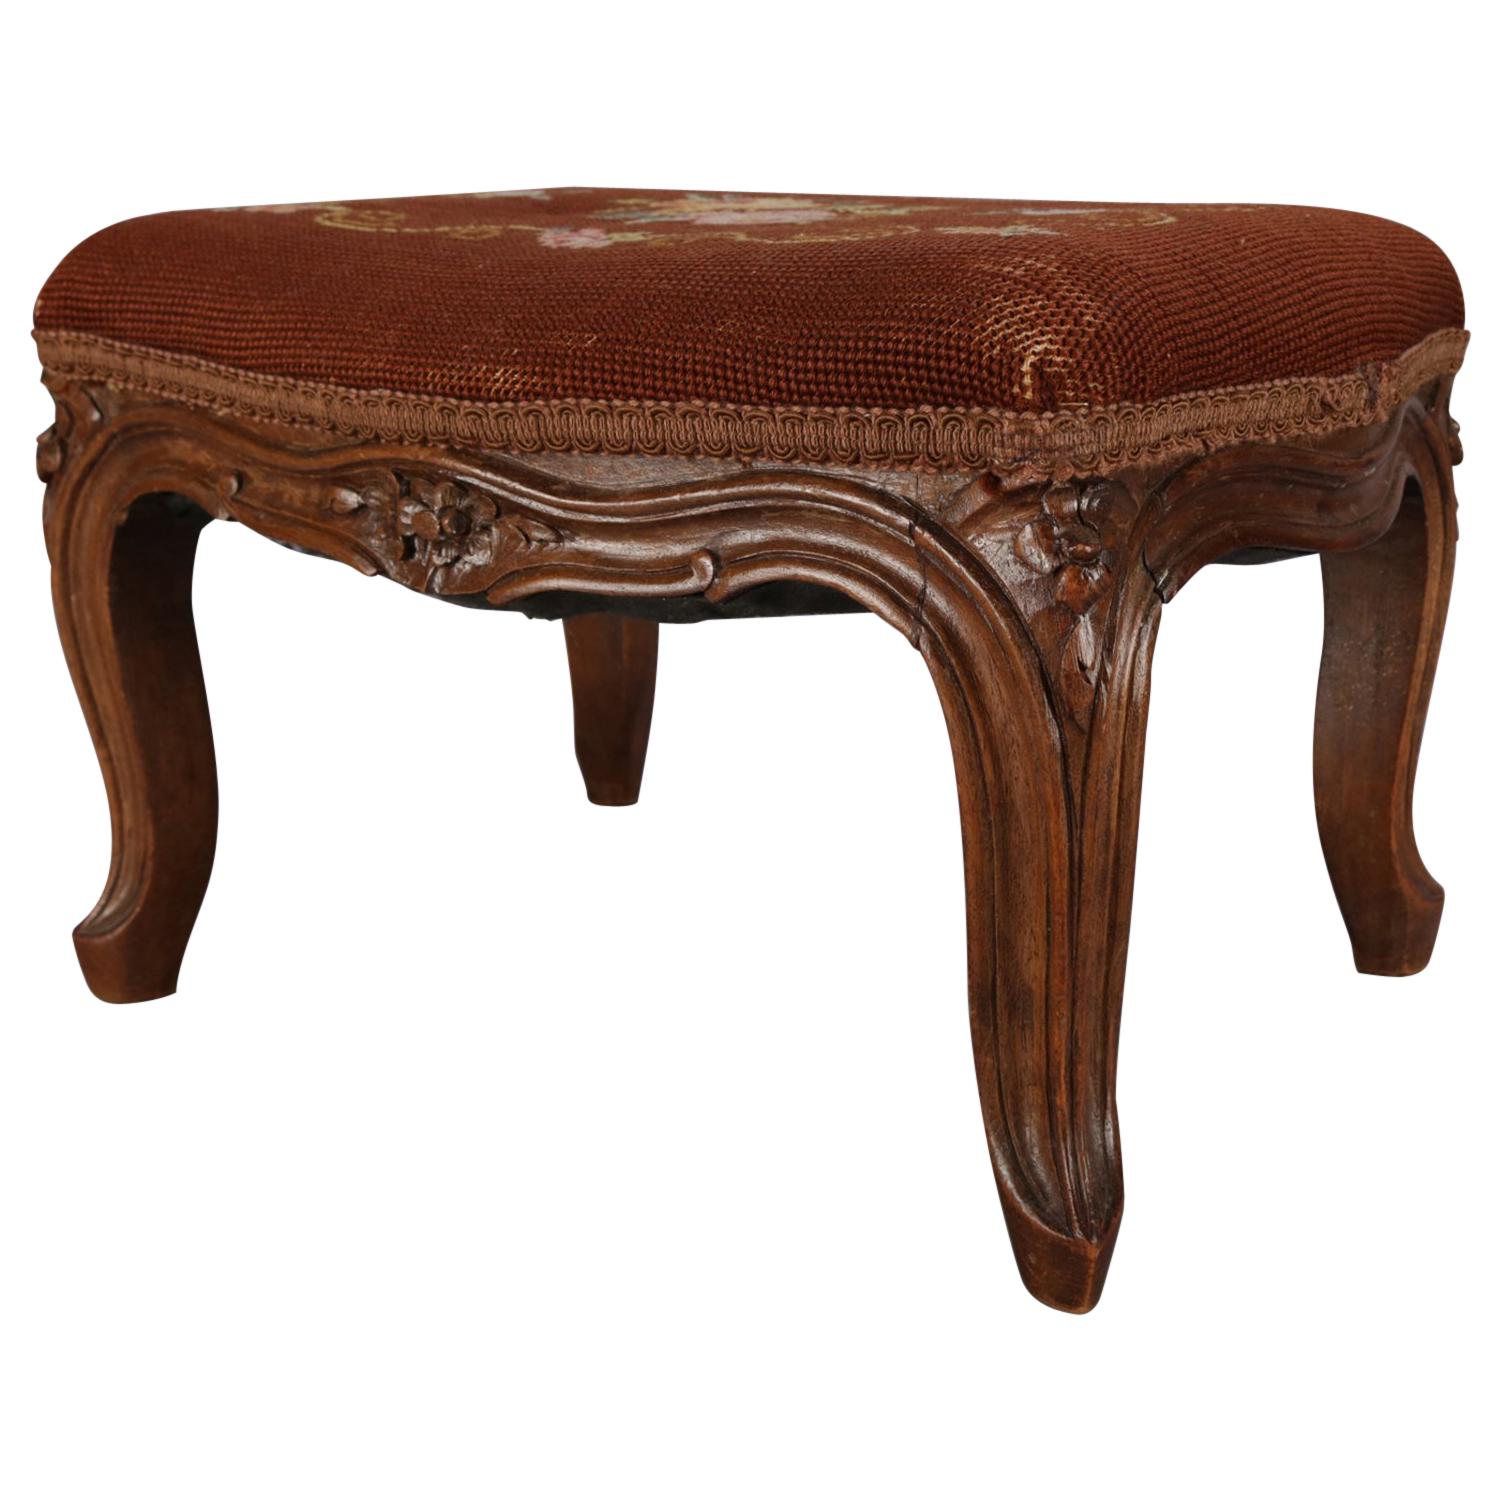 Antique French Louis XIV Carved Walnut and Floral Tapestry Footstool, circa 1890